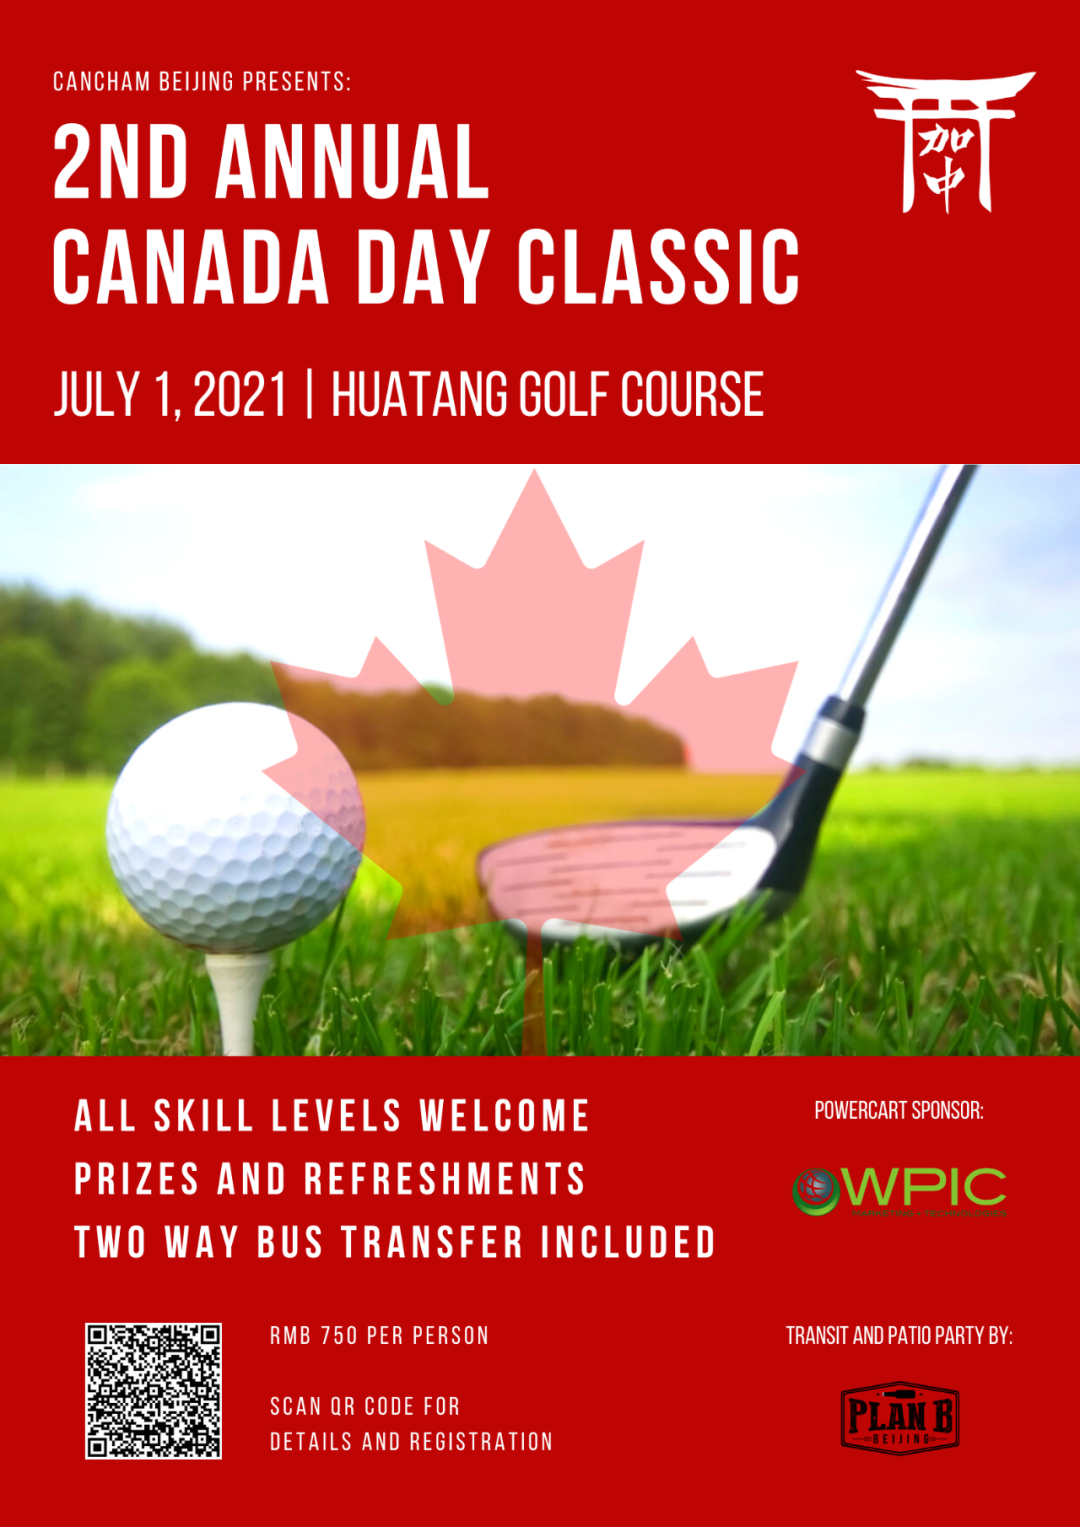 The 2nd Annual Canada Day Classic Golf Tournament the Beijinger